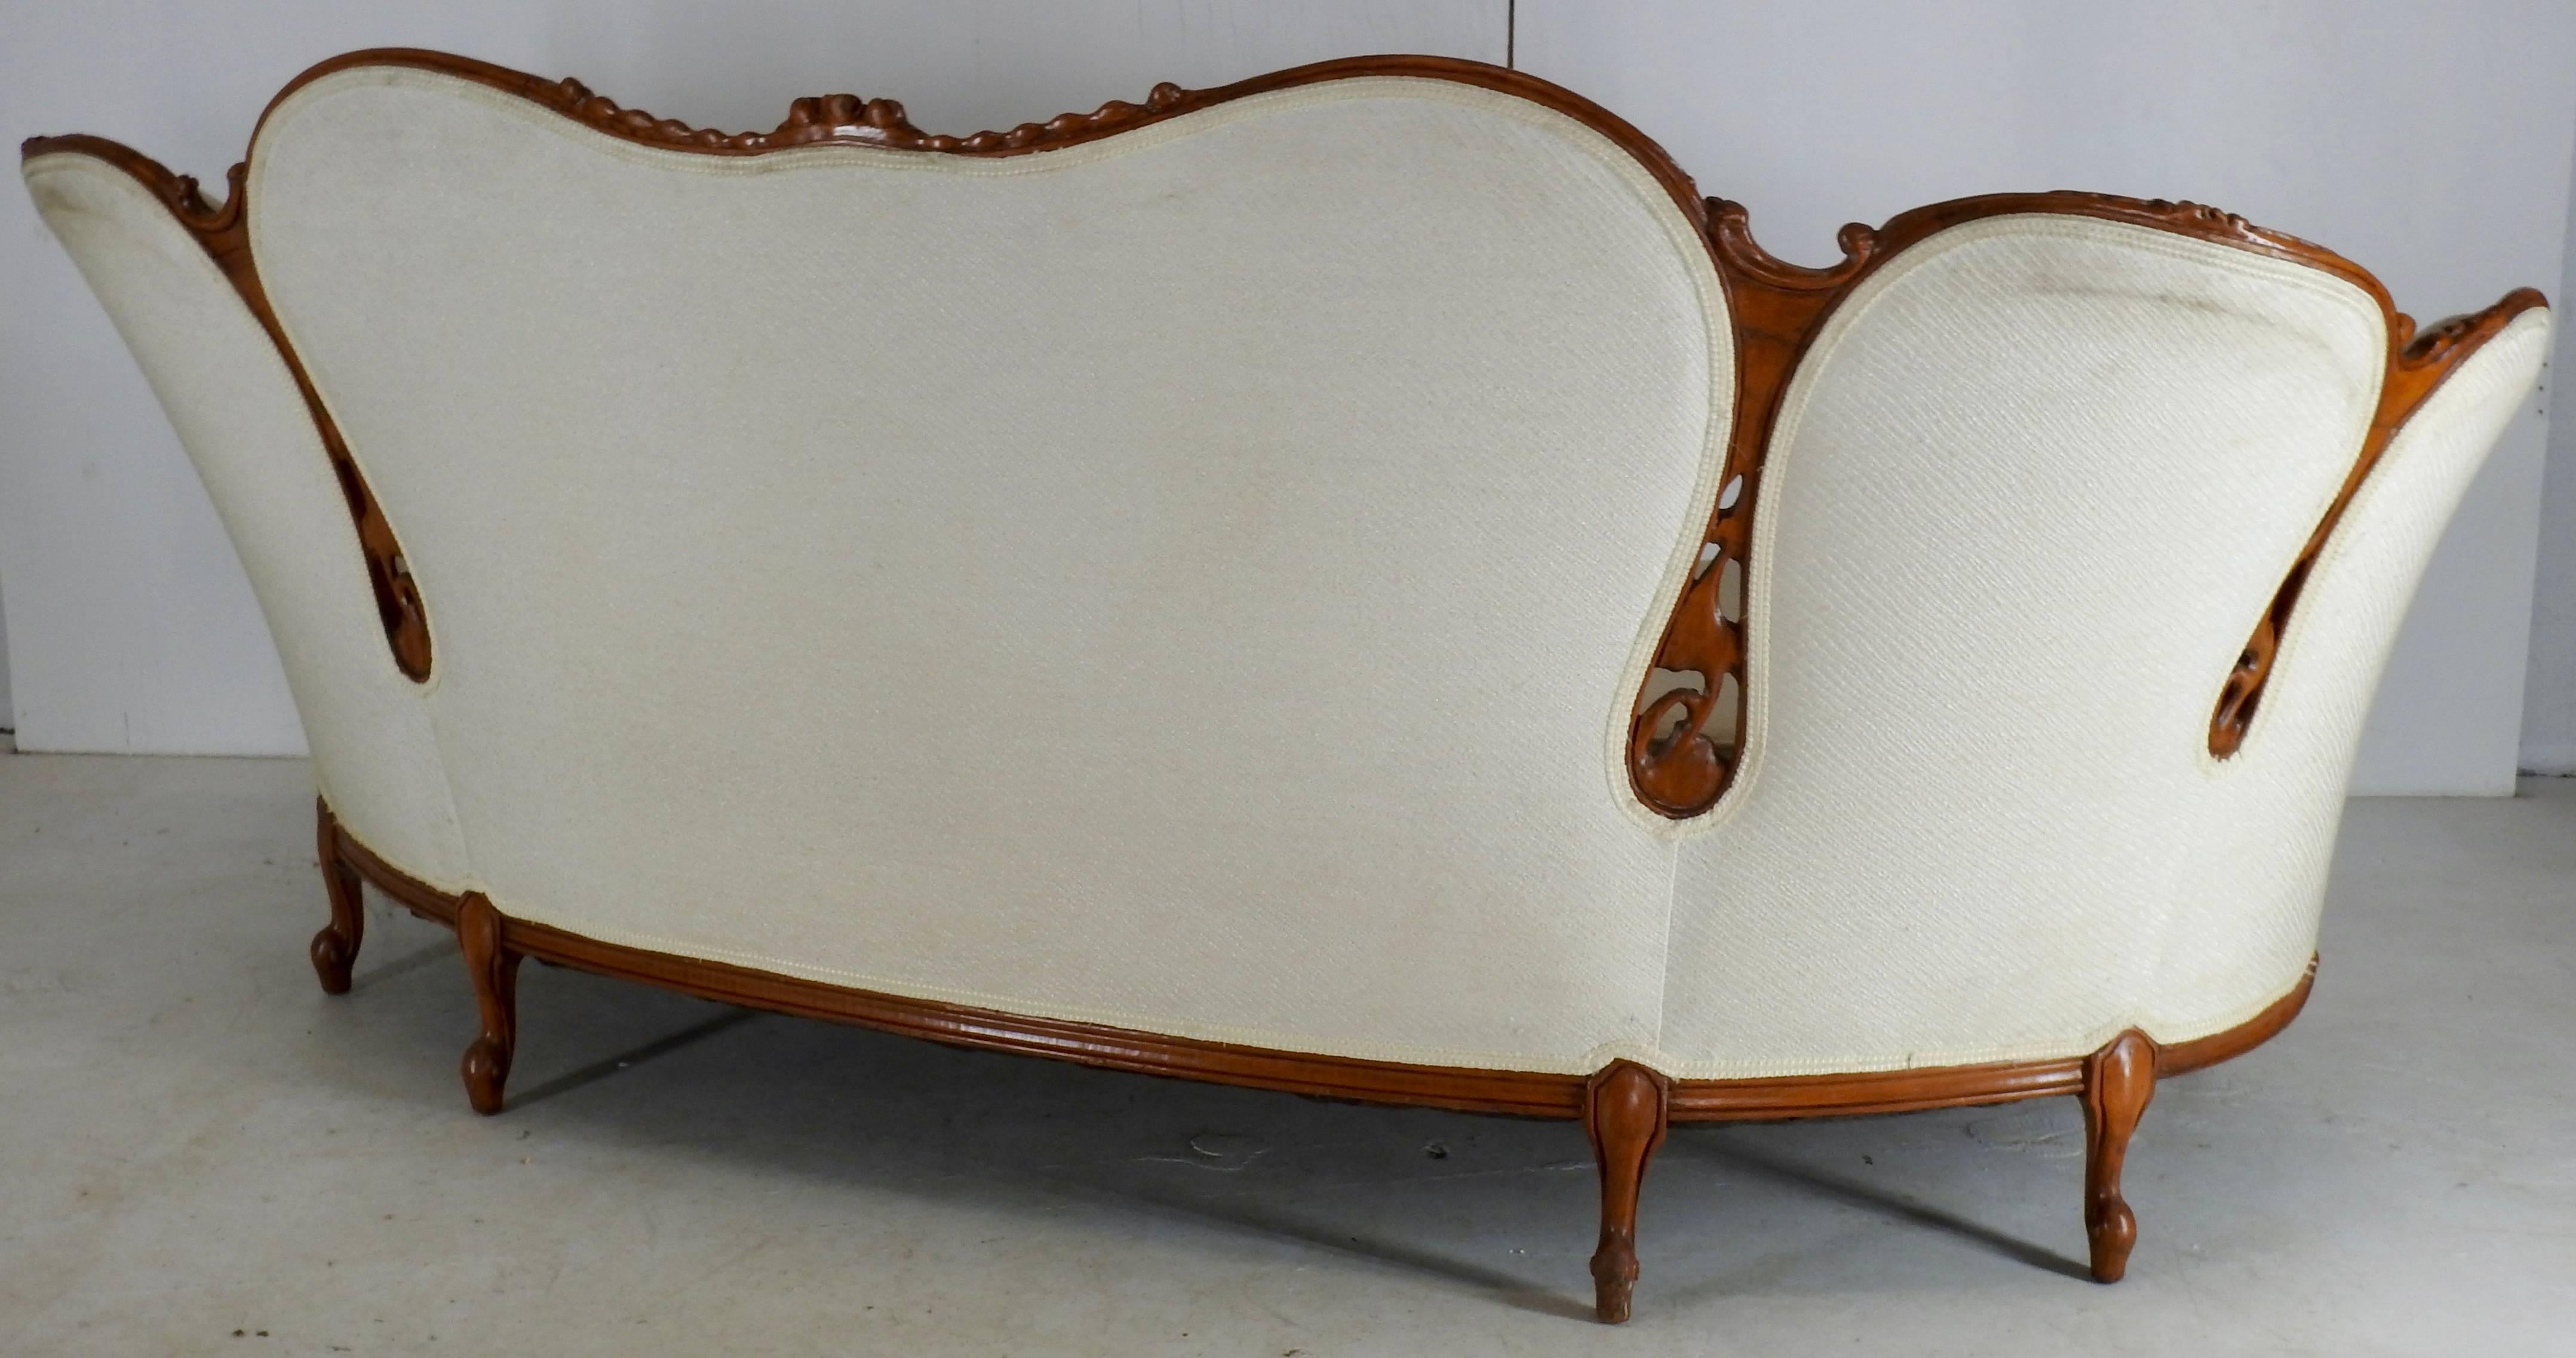 Elegance makes up this sofa from the Victorian era. Woven cream color fabric with trim adorns the sofa which has detailed carved wood trim. Graceful curves make up the back and sides which sit atop a snail foot. Cutouts in the wood add to the beauty